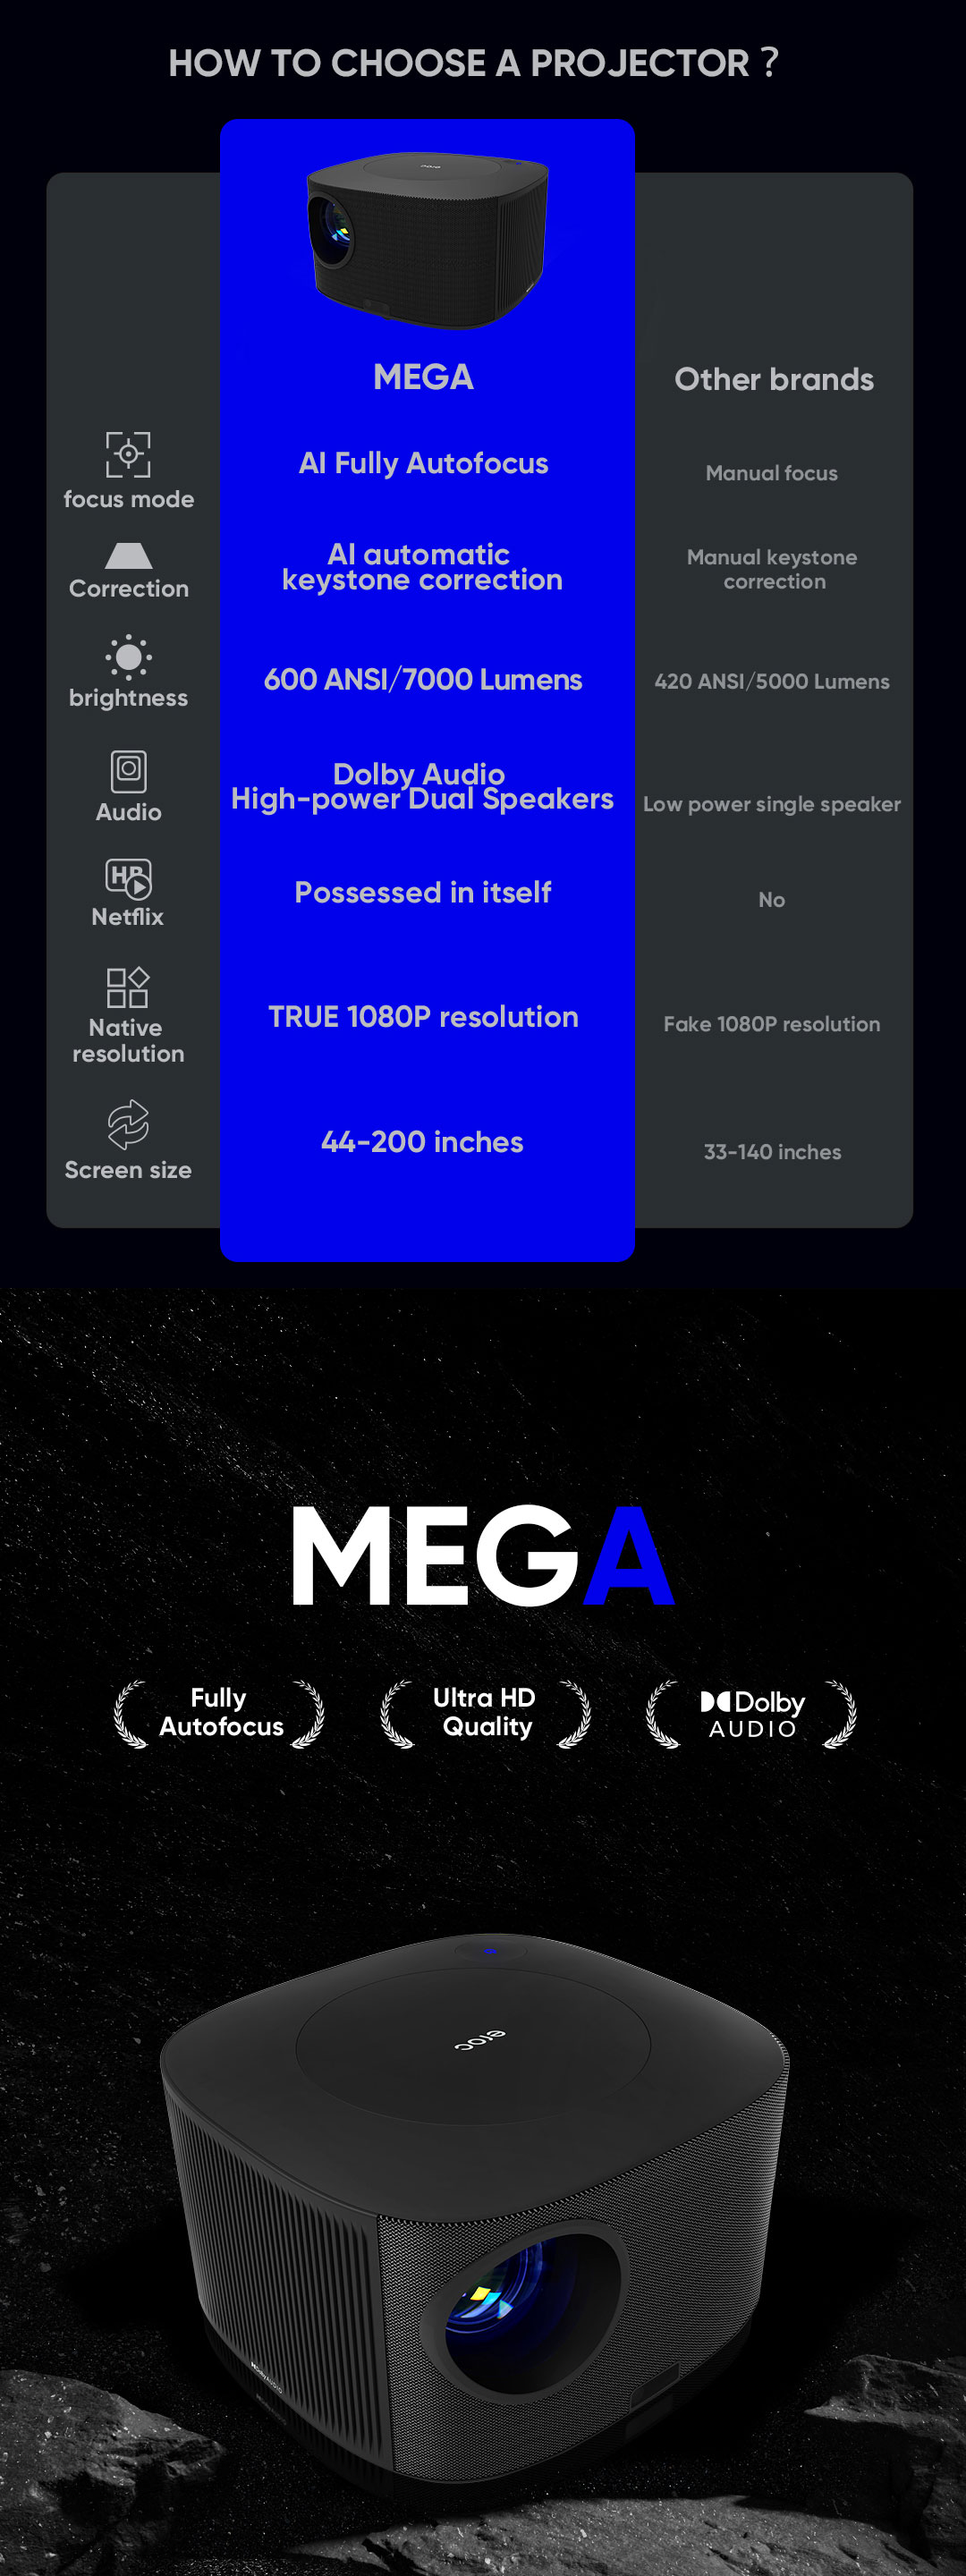 EROC - MEGA Projector Full HD 600 ANSI Android 9 OS 200 Screen BT5.0 Wifi 2.4 + 5G Fully Auto Focus